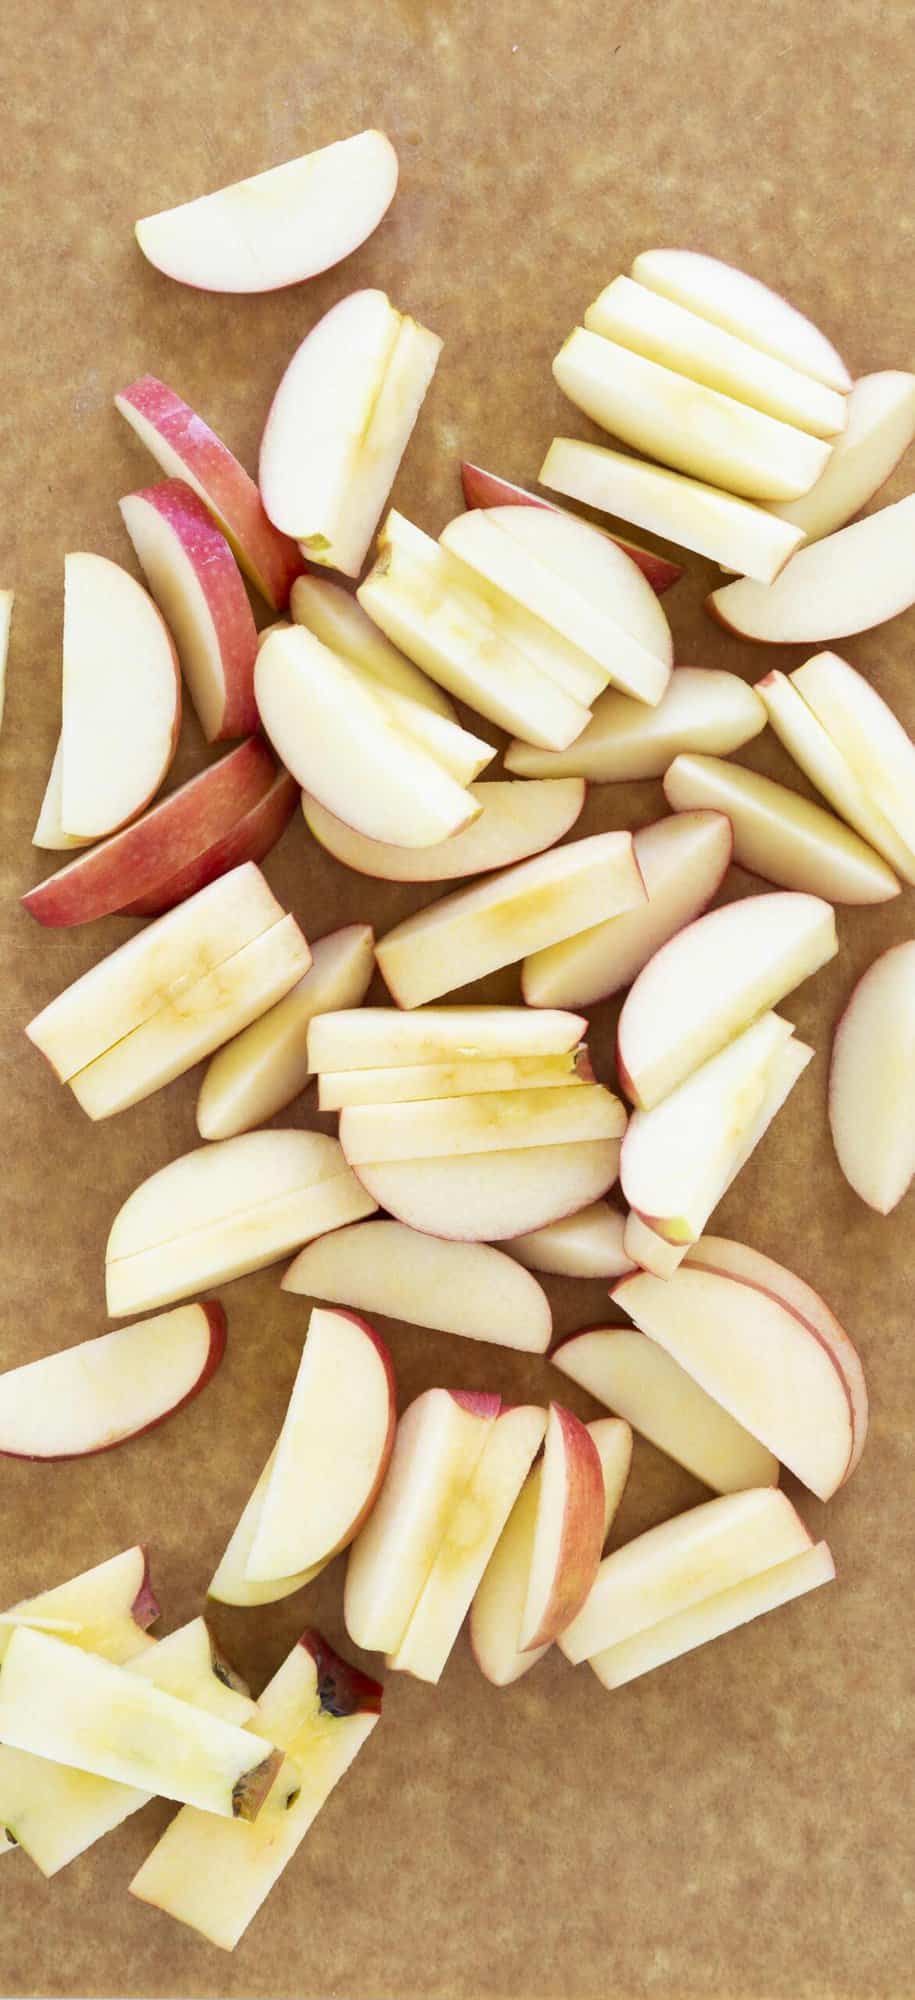 How To Store Cut Up Apples